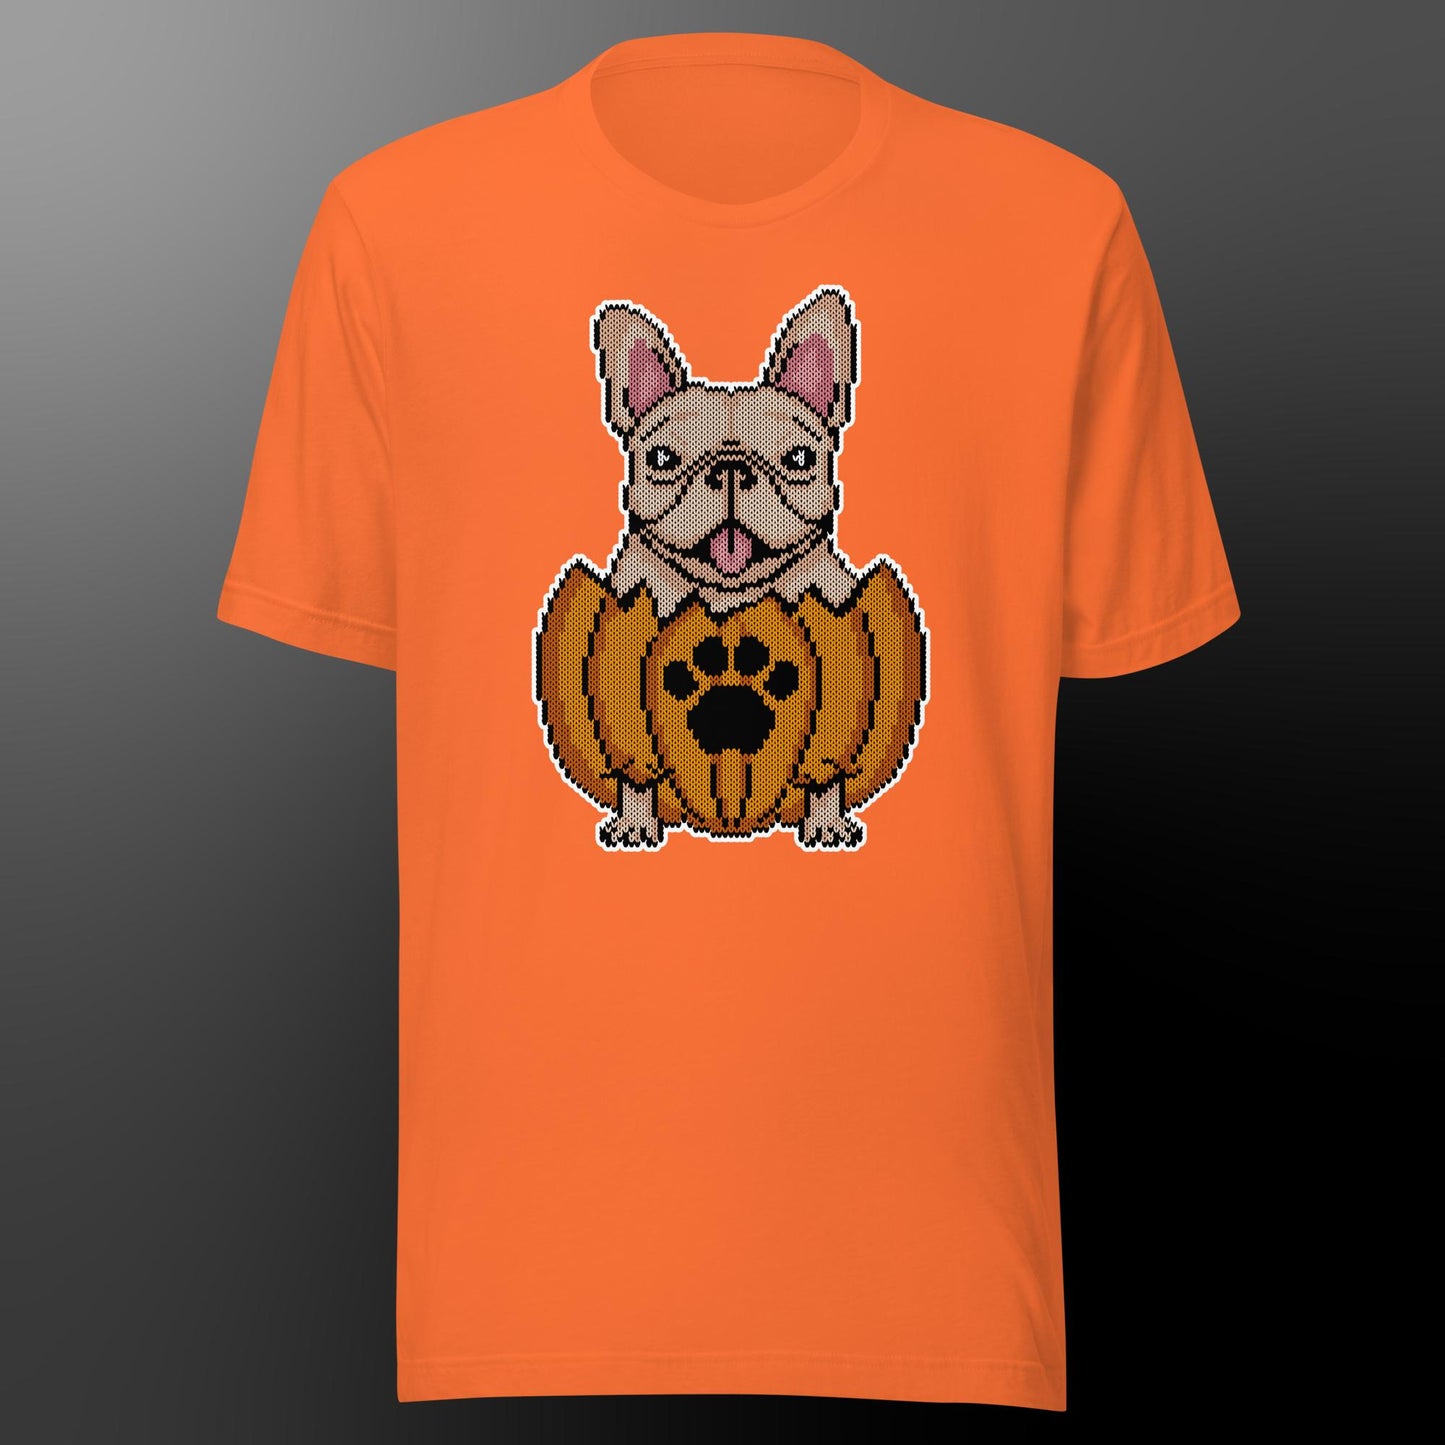 Halloween shirt with frenchie (fur color creme)